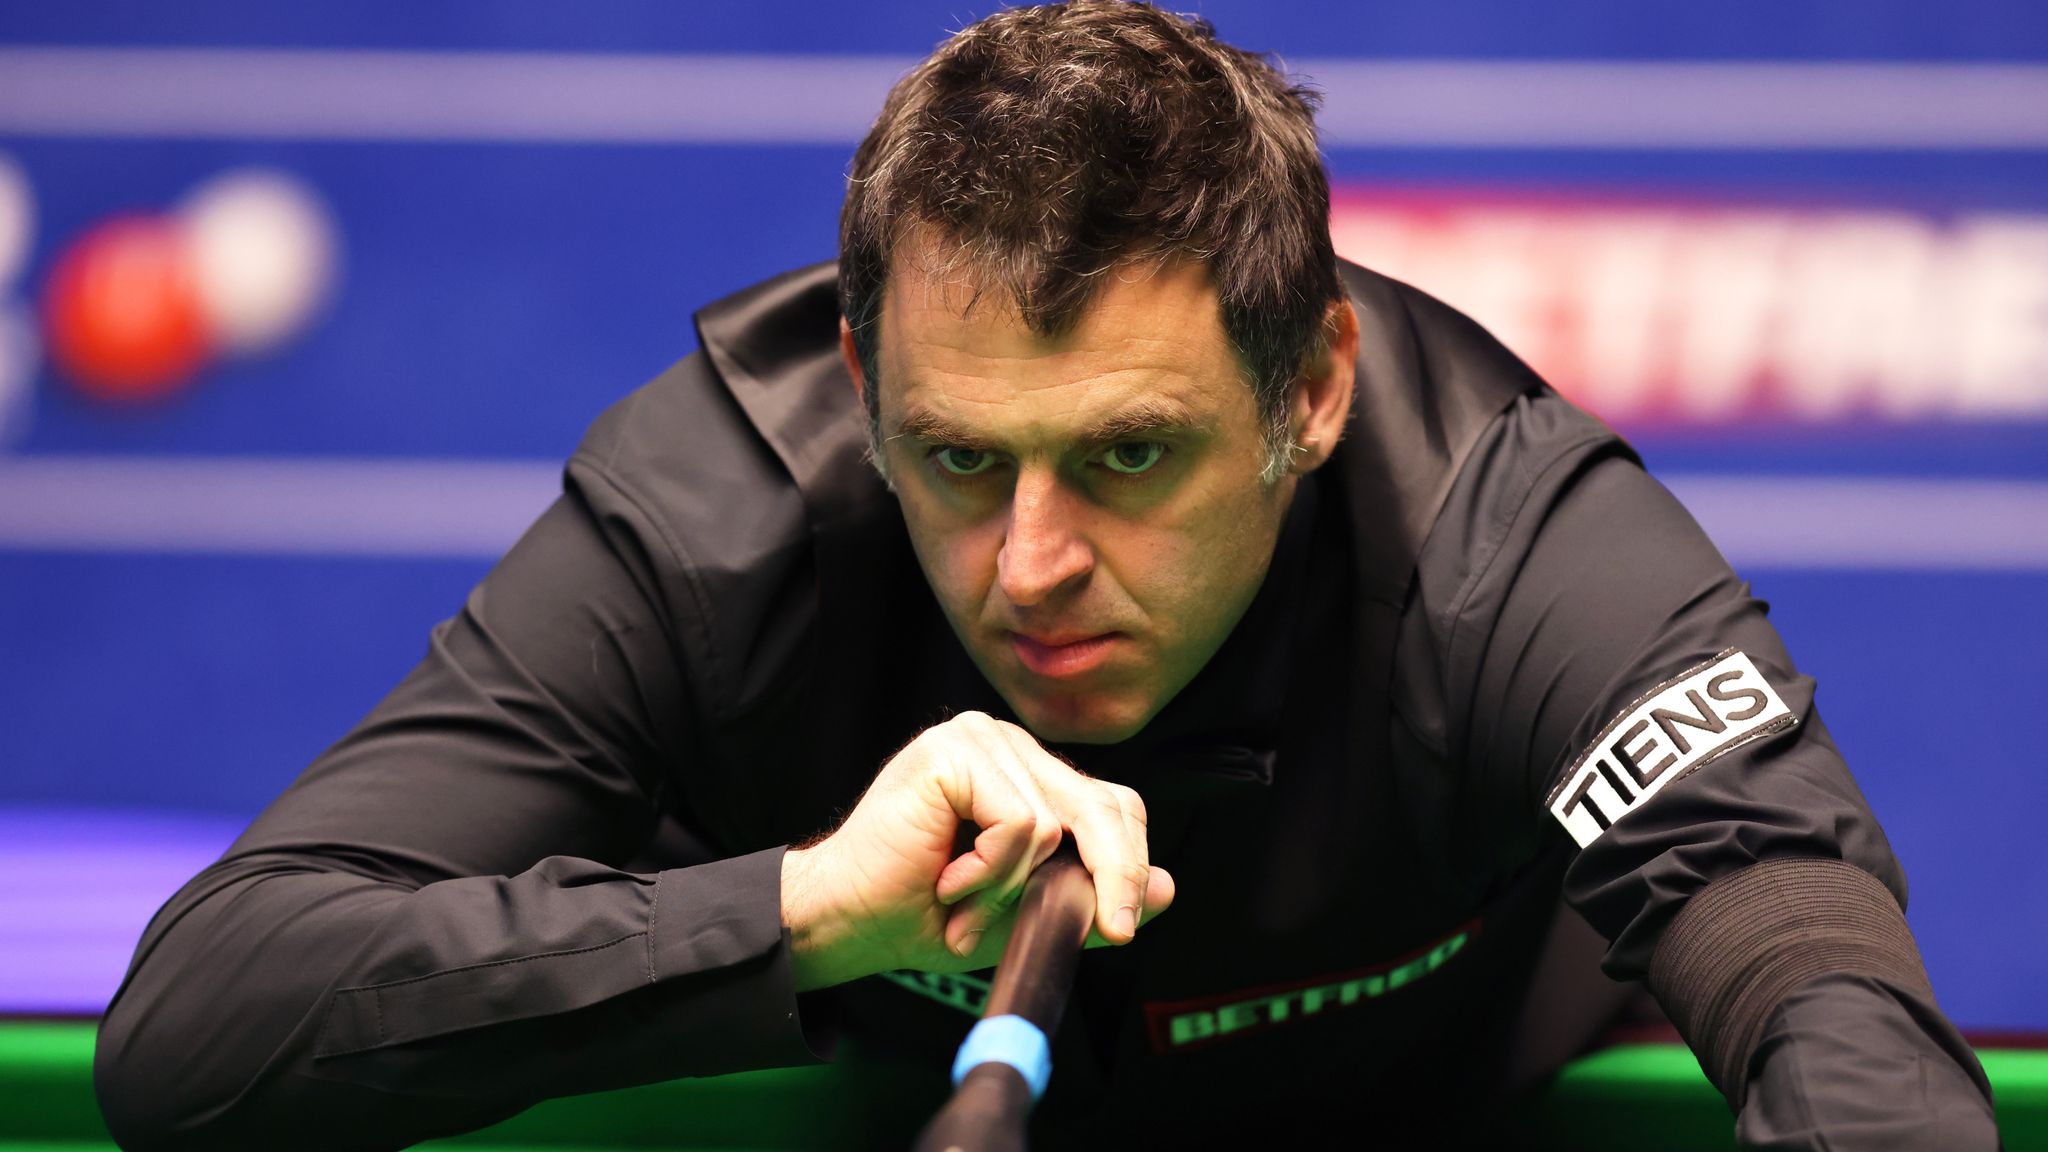 Ronnie OSullivan reveals he was accosted by a fan in nightmare incident before World Snooker Championship win Snooker News Sky Sports